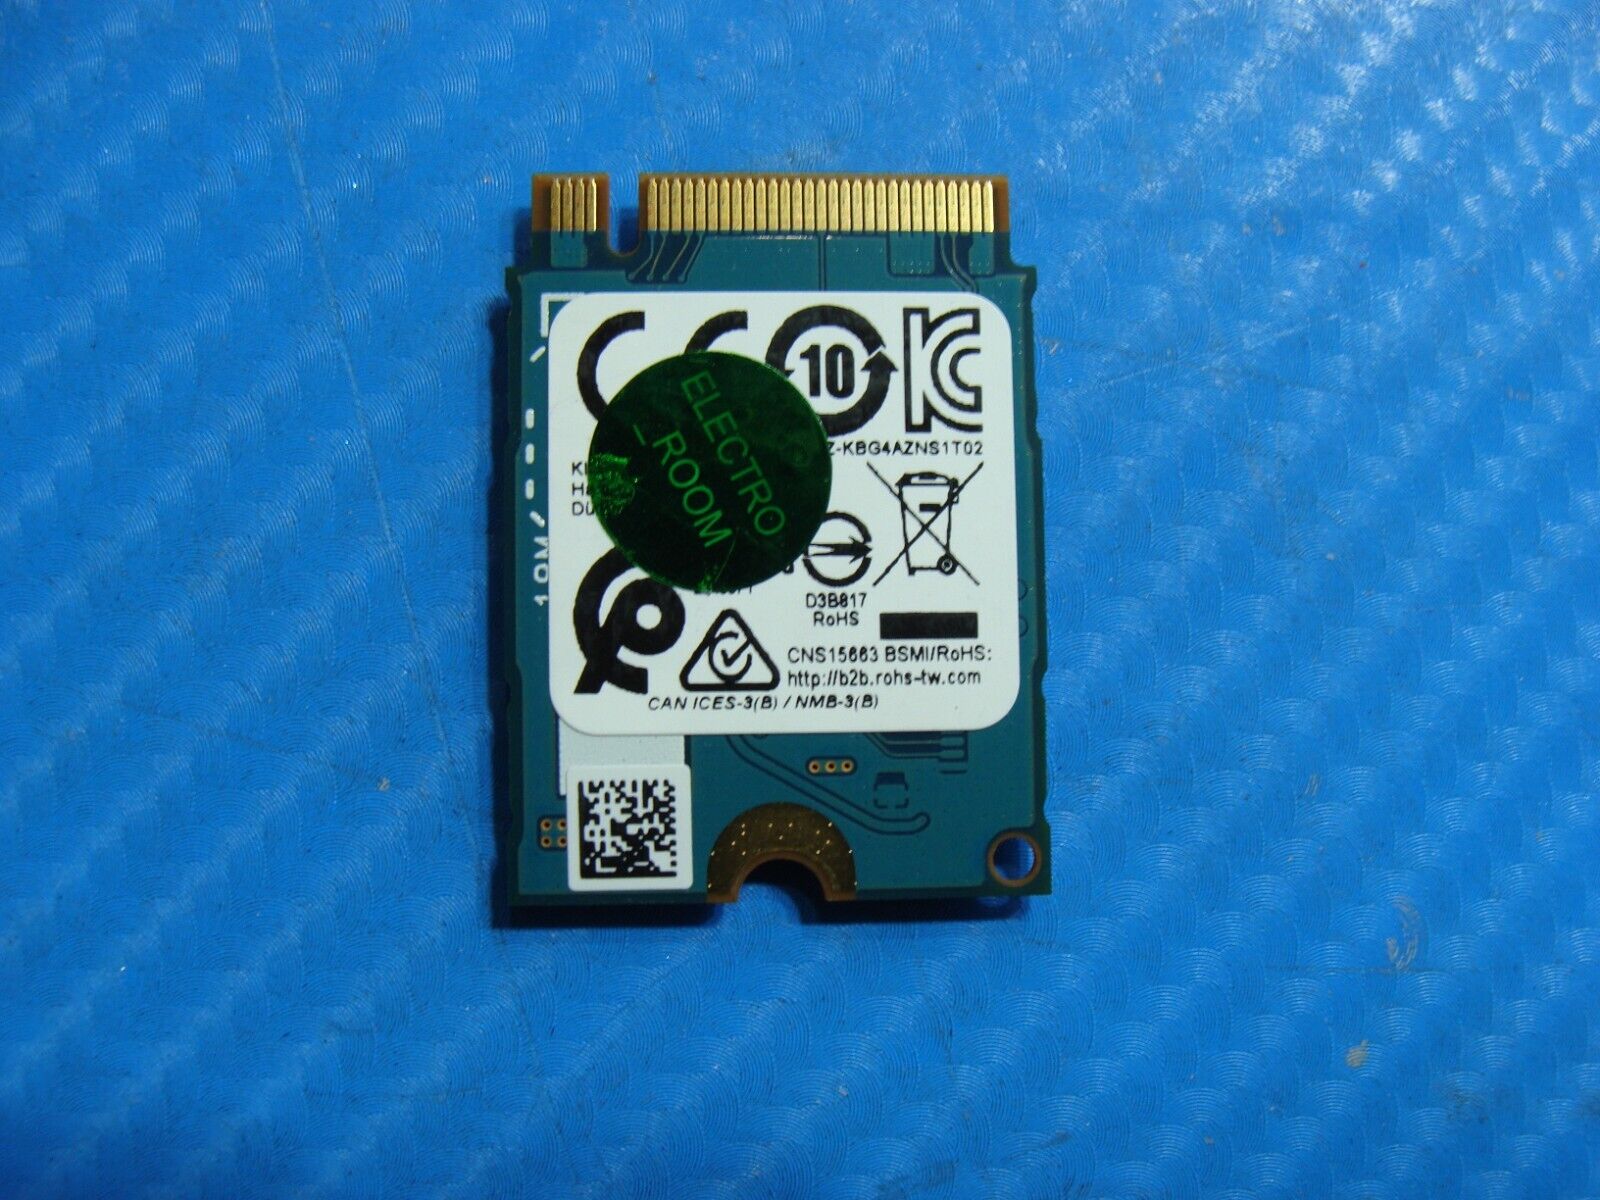 Dell 5300 Kioxia 256GB M.2 NVMe SSD Solid State Drive KBG40ZNS256G FWJTG